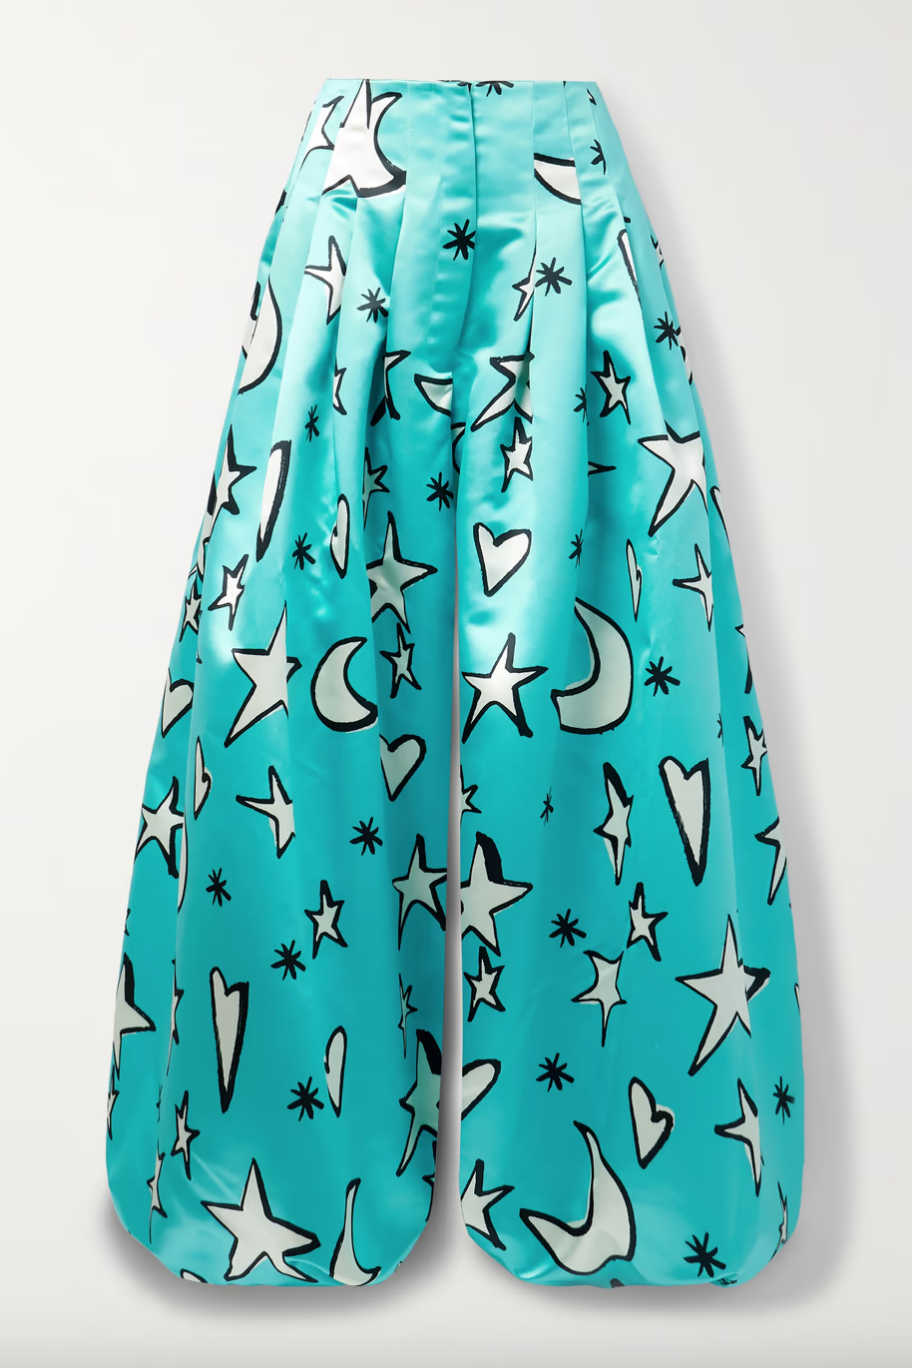 Brynn Whitfield's Turquoise Star Print Pants